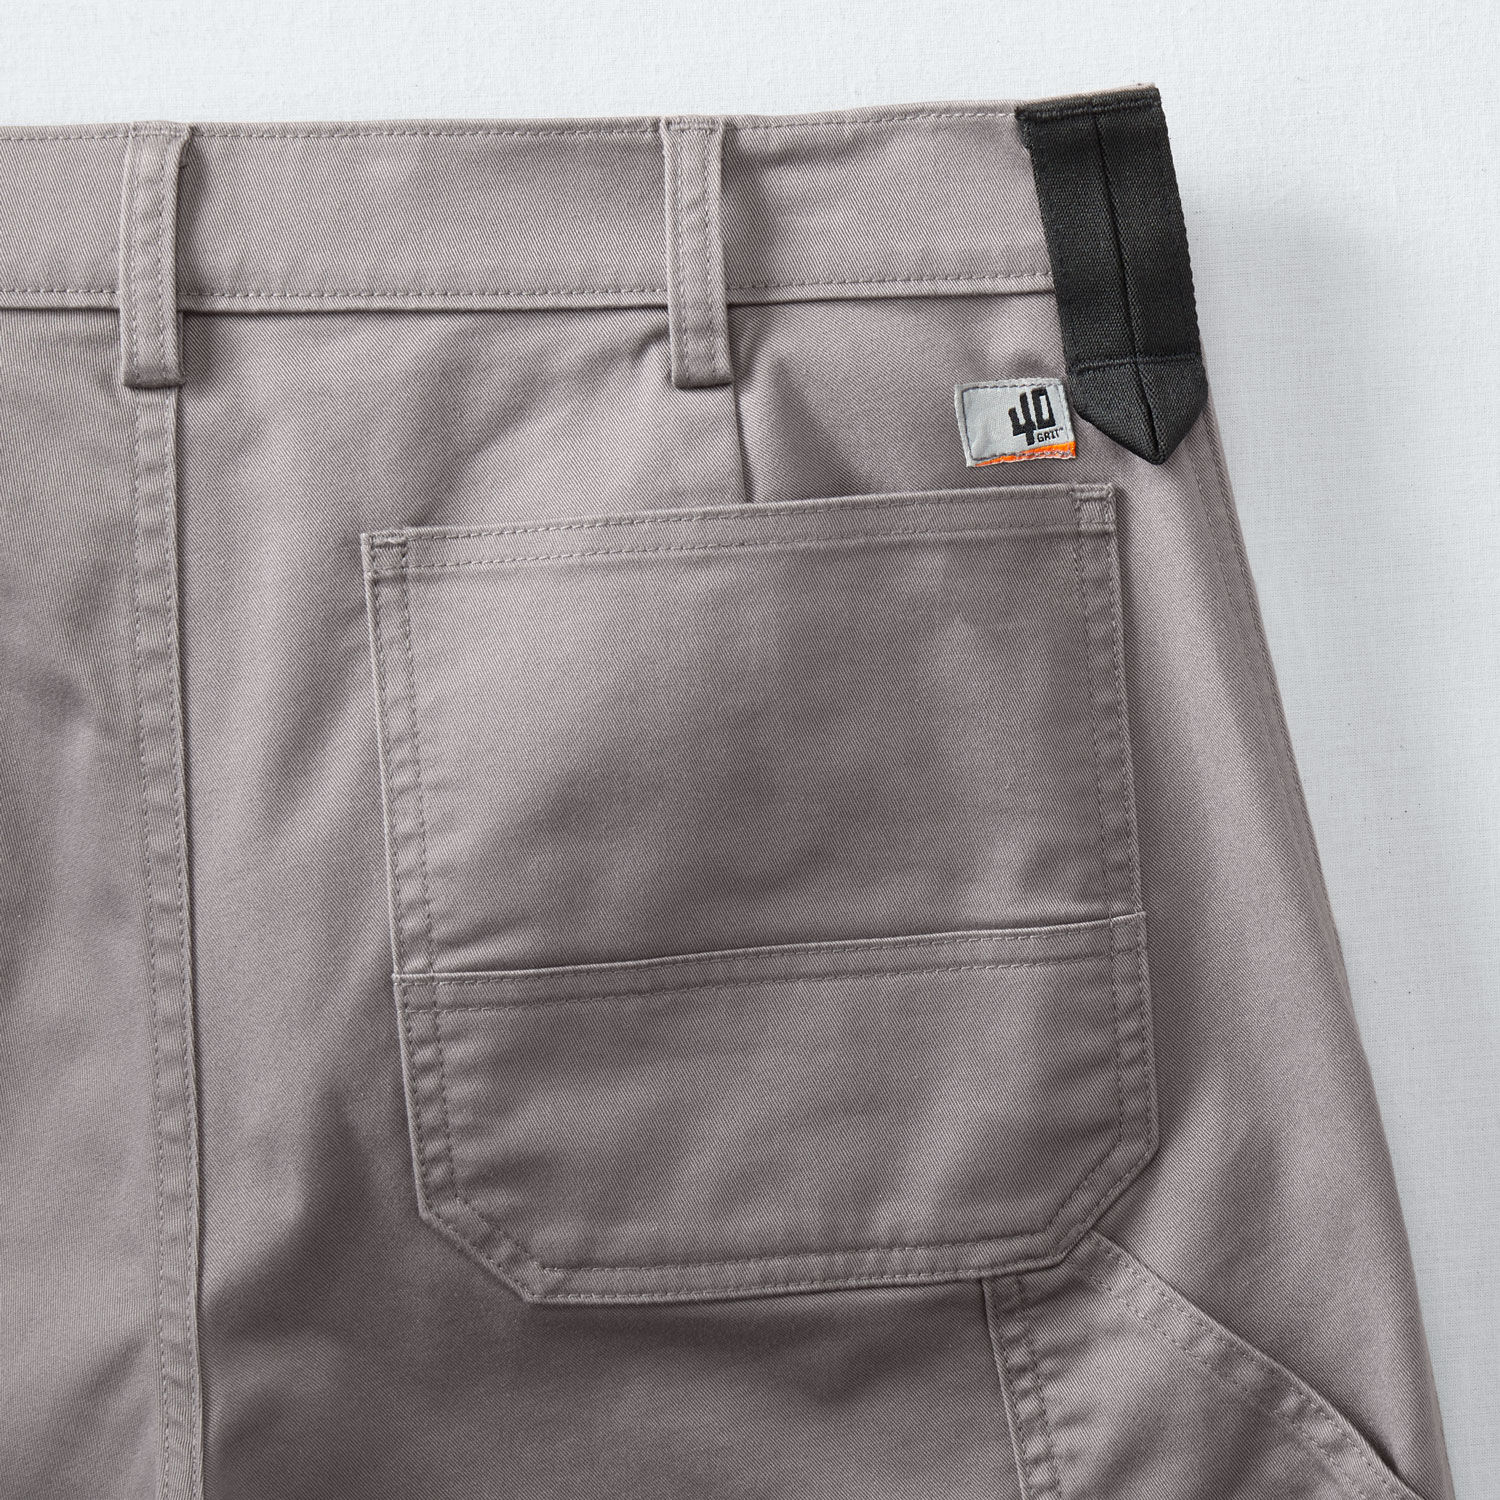 CARHARTT Twill Work Pants Relaxed Fit Size 44x34 Color B290KHI NWT   eBay